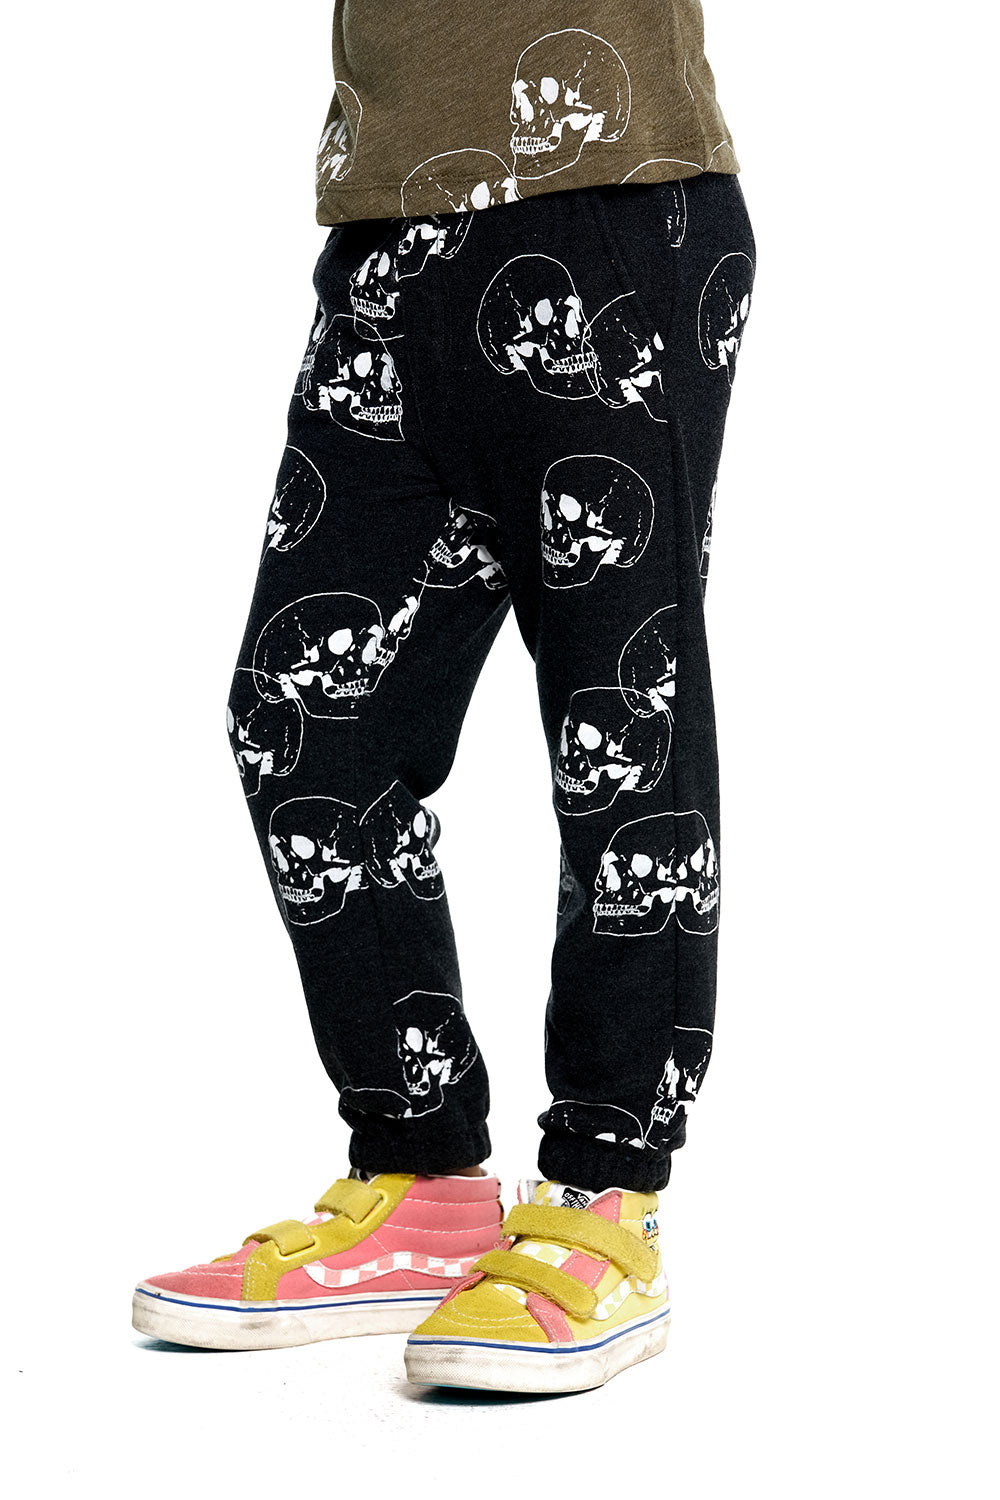 Skull Party Pants BOYS chaserbrand